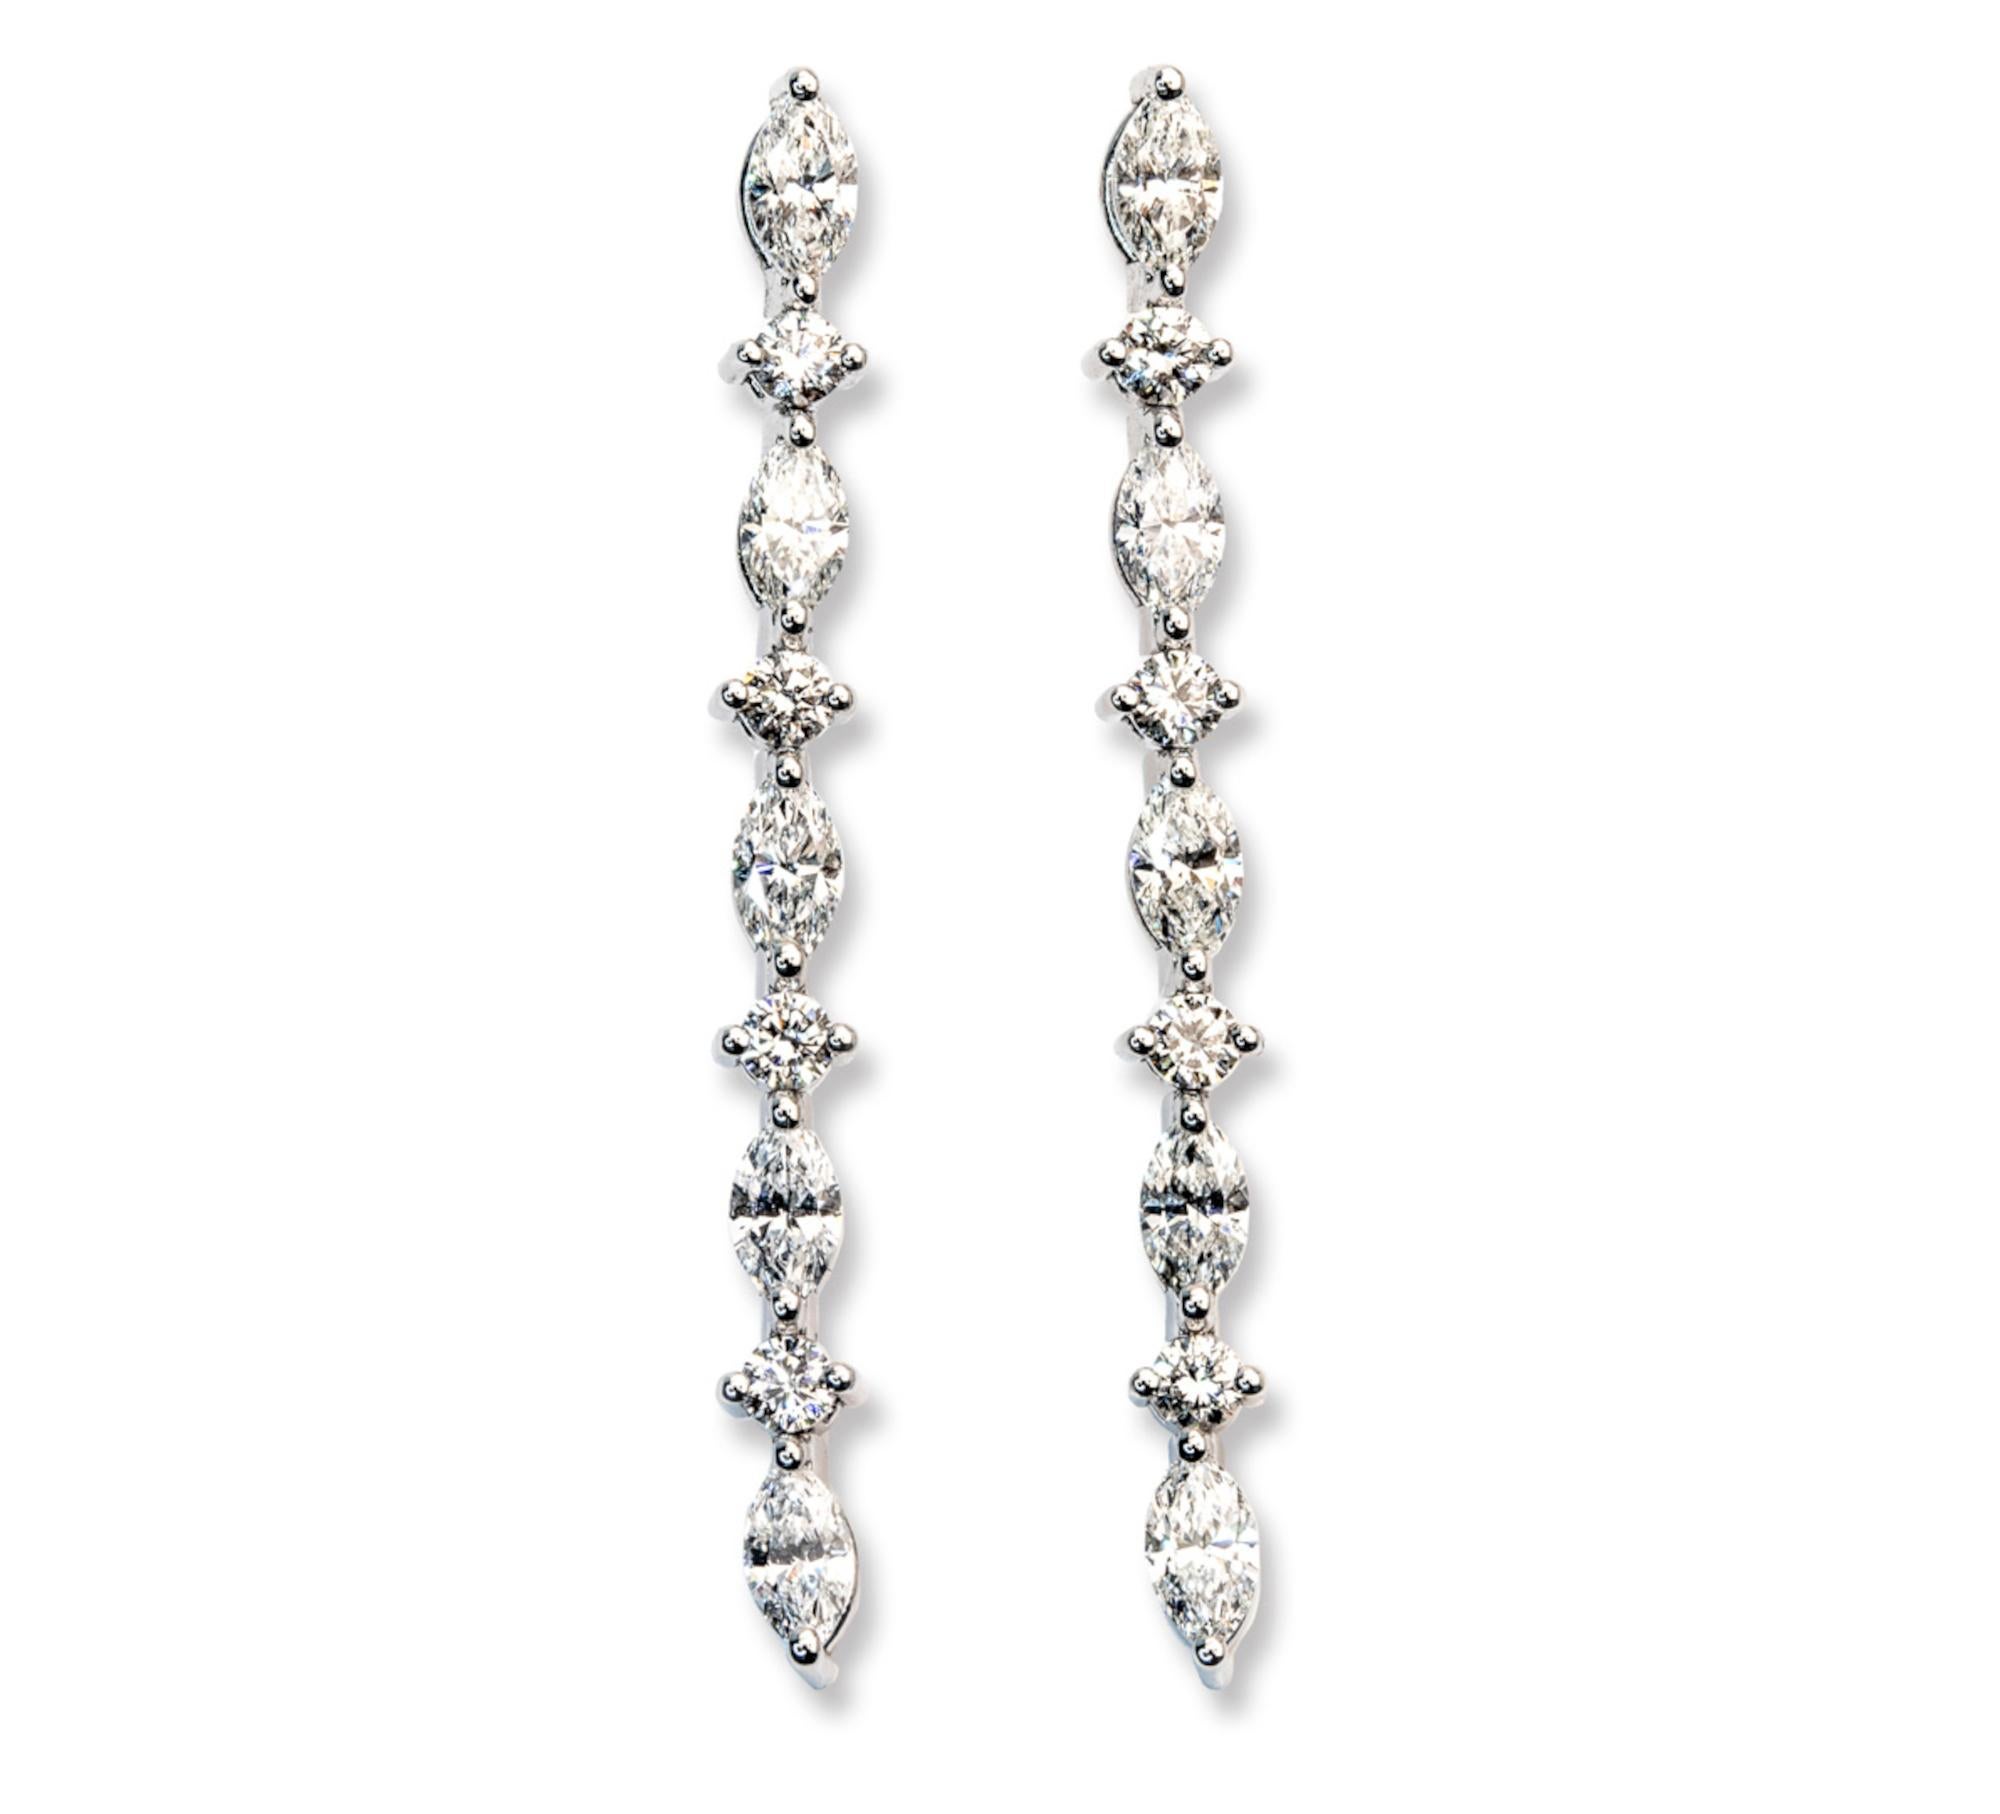 Introducing the epitome of refinement and allure - our 1.38 Carat E-F Color VS Round Cut Diamond Degradè Dangle Earrings. These exquisite earrings, weighing a total of 5.20 grams in luxurious 18k white gold, are a celebration of elegance and